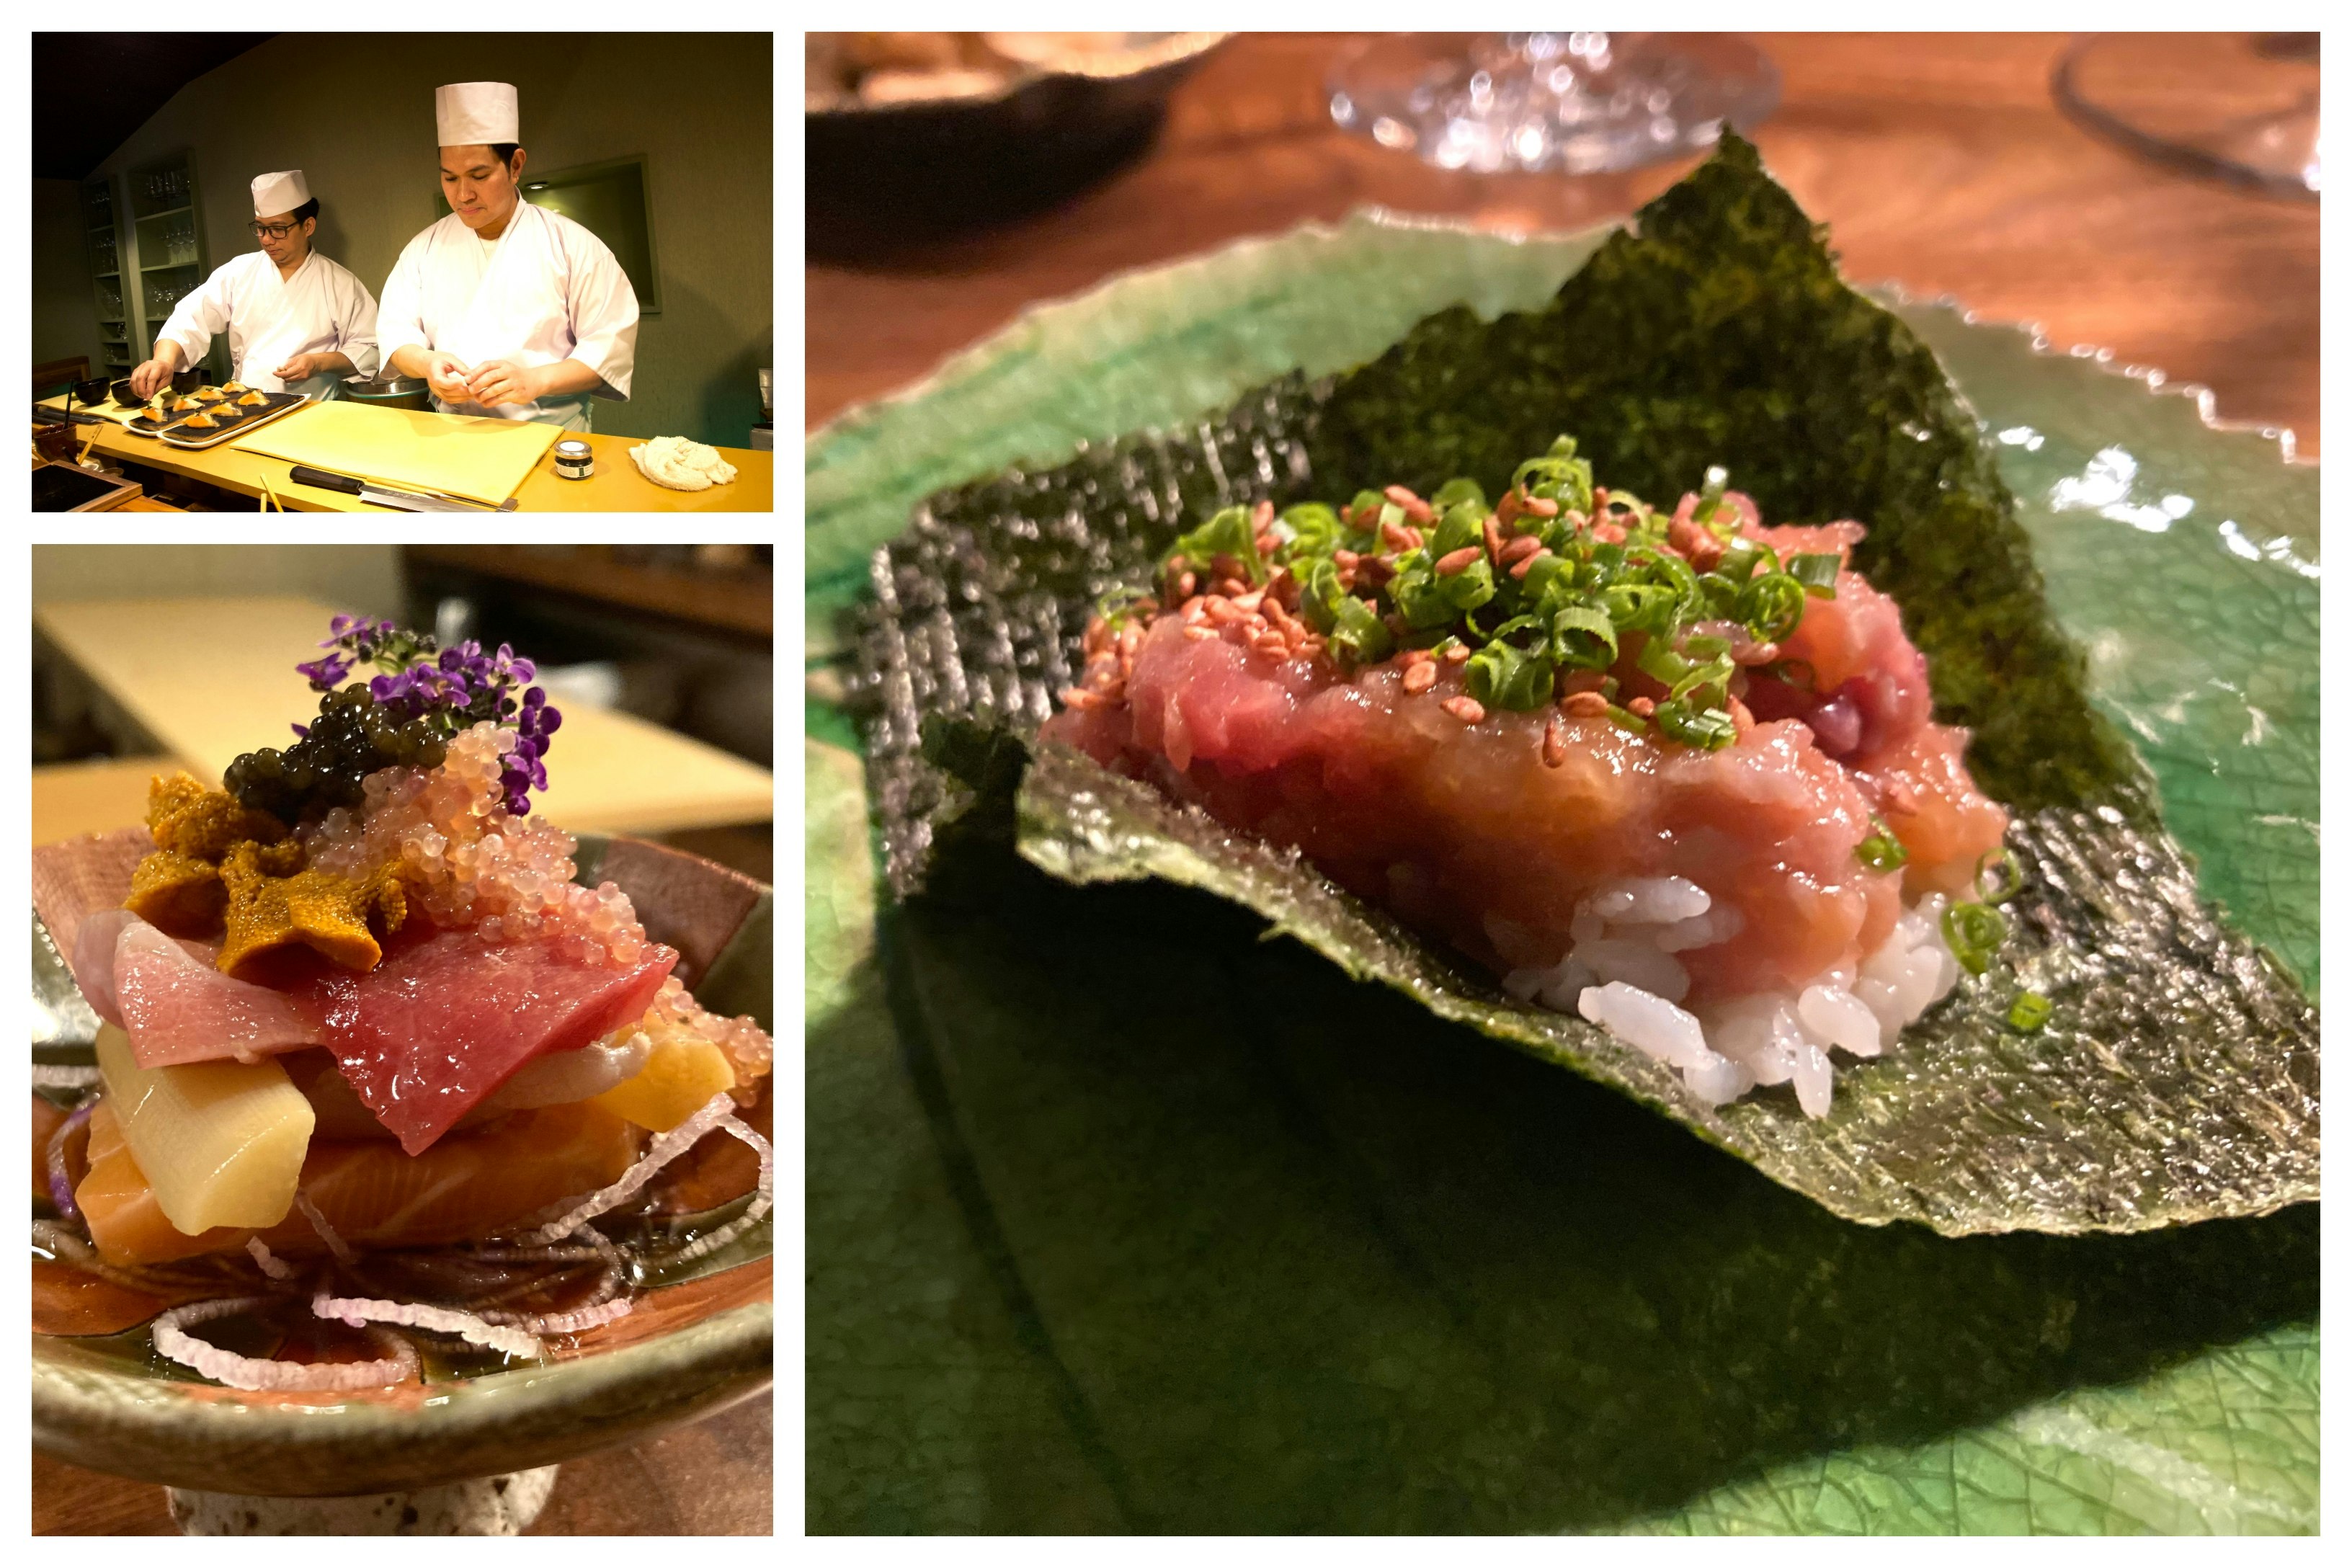 Up-close shots of sushi dinner in Norway